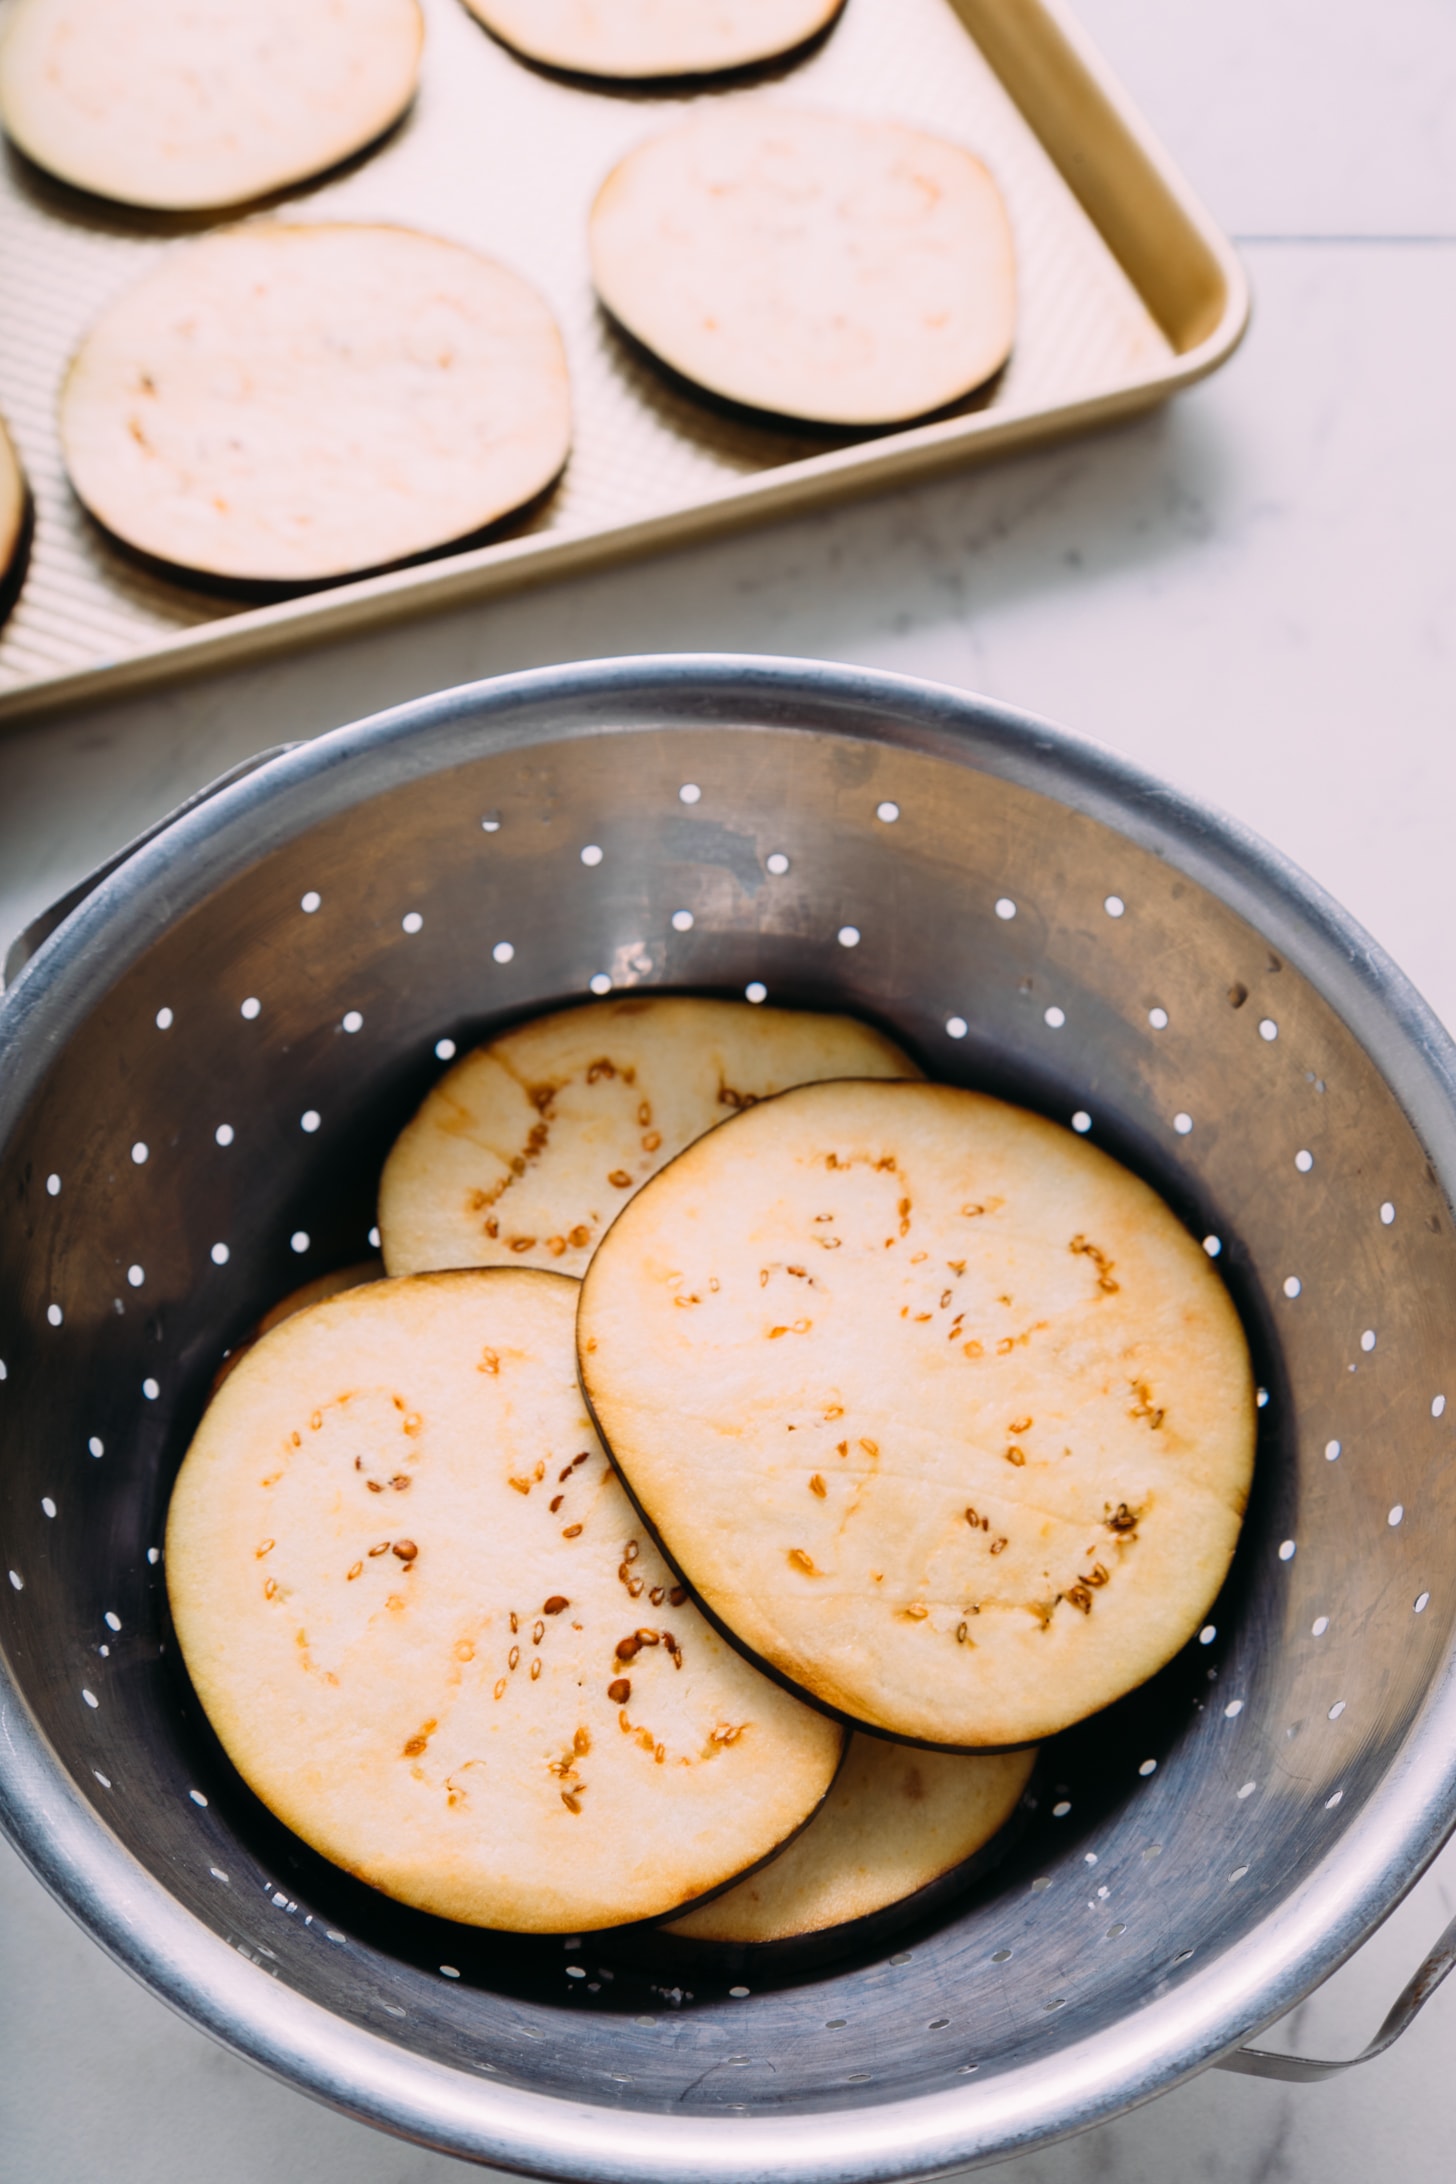 Colander and baking sheet of eggplant rounds